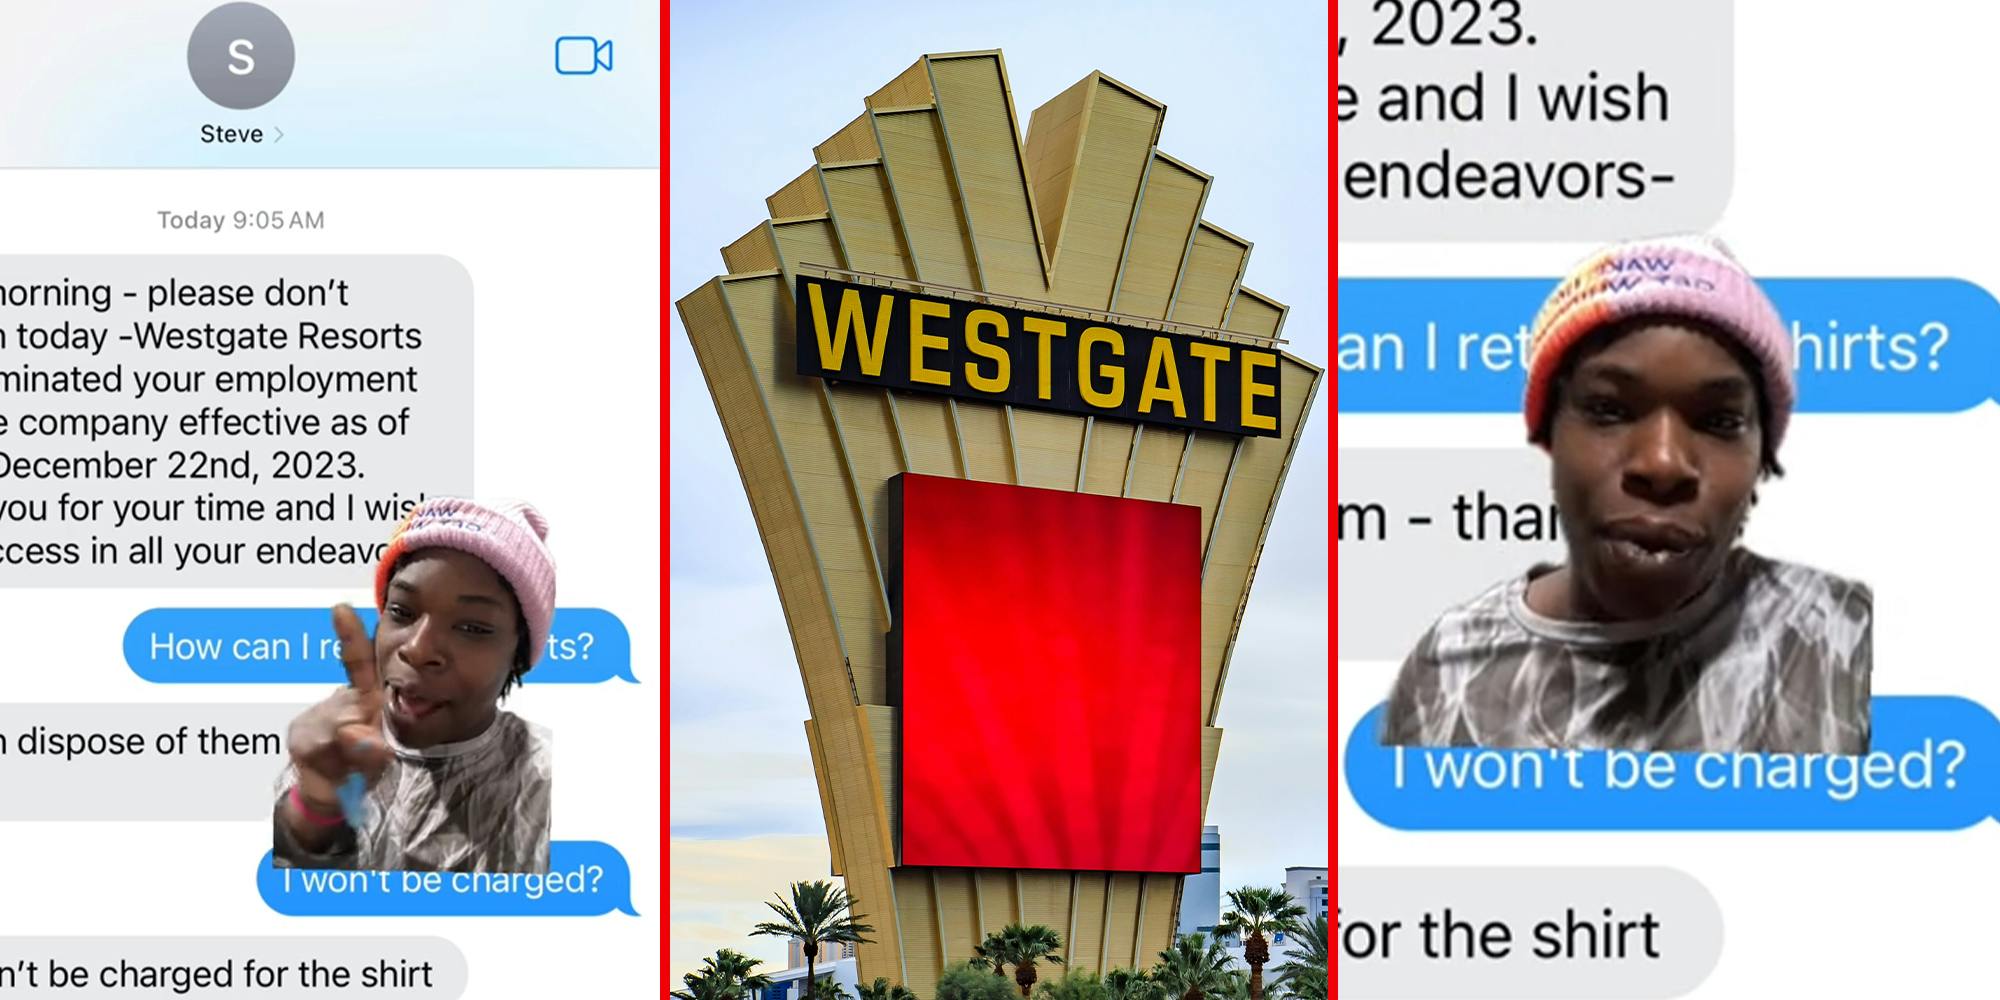 Worker gets ready for shift at Westgate Resorts. Then manager fires her over text